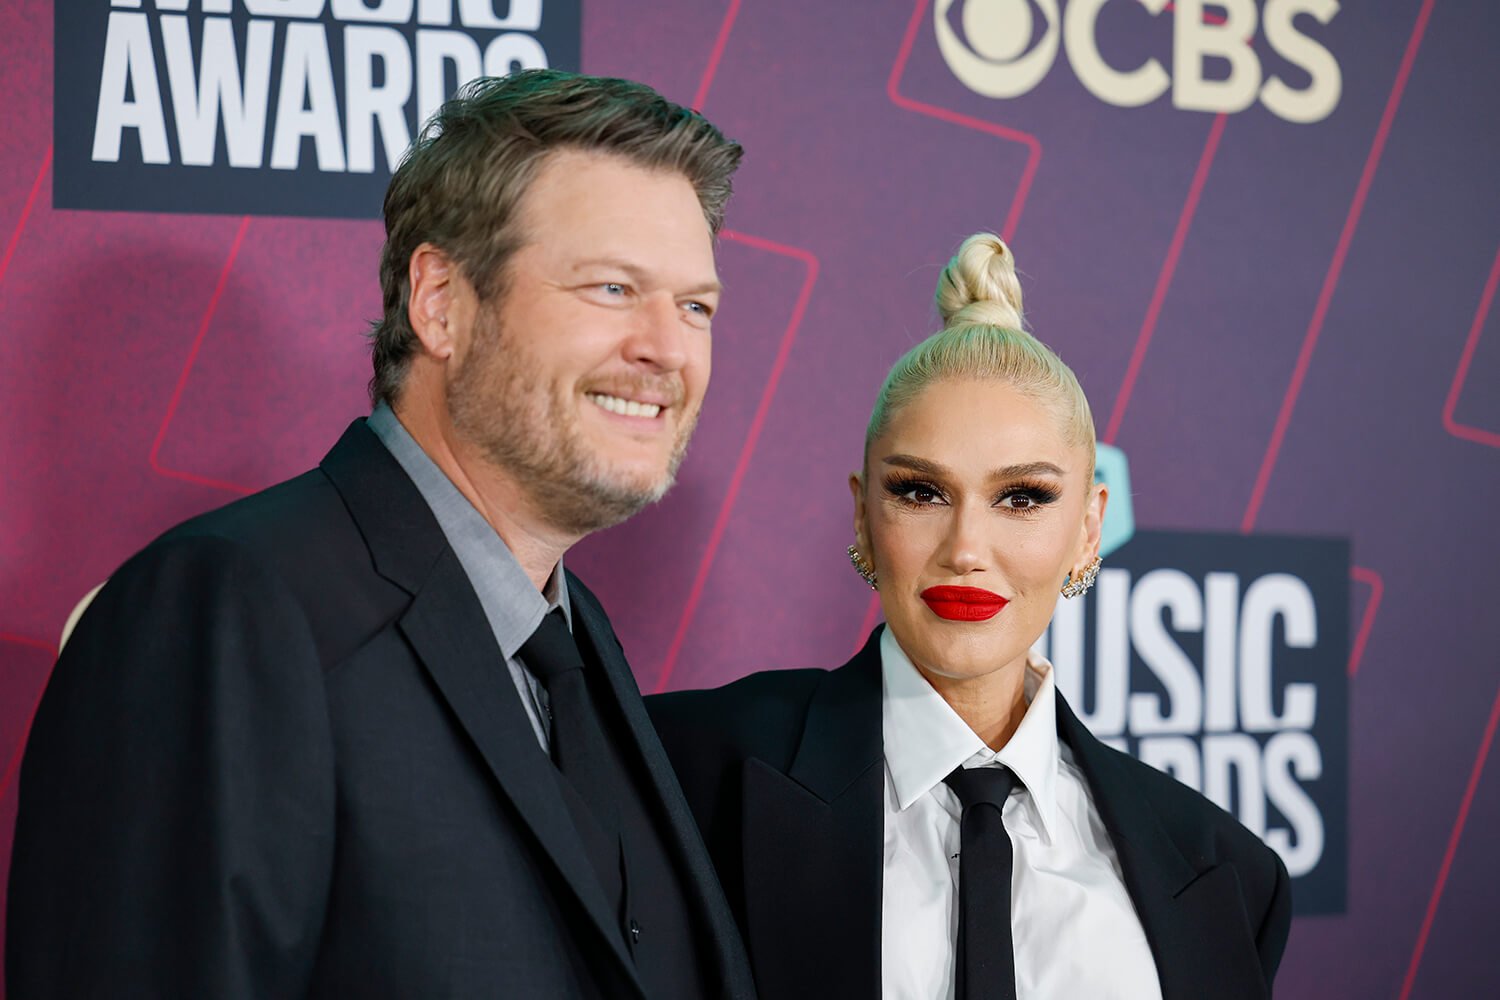 Blake Shelton and Gwen Stefani pose together at the 2023 CMT Music Awards in black suits.